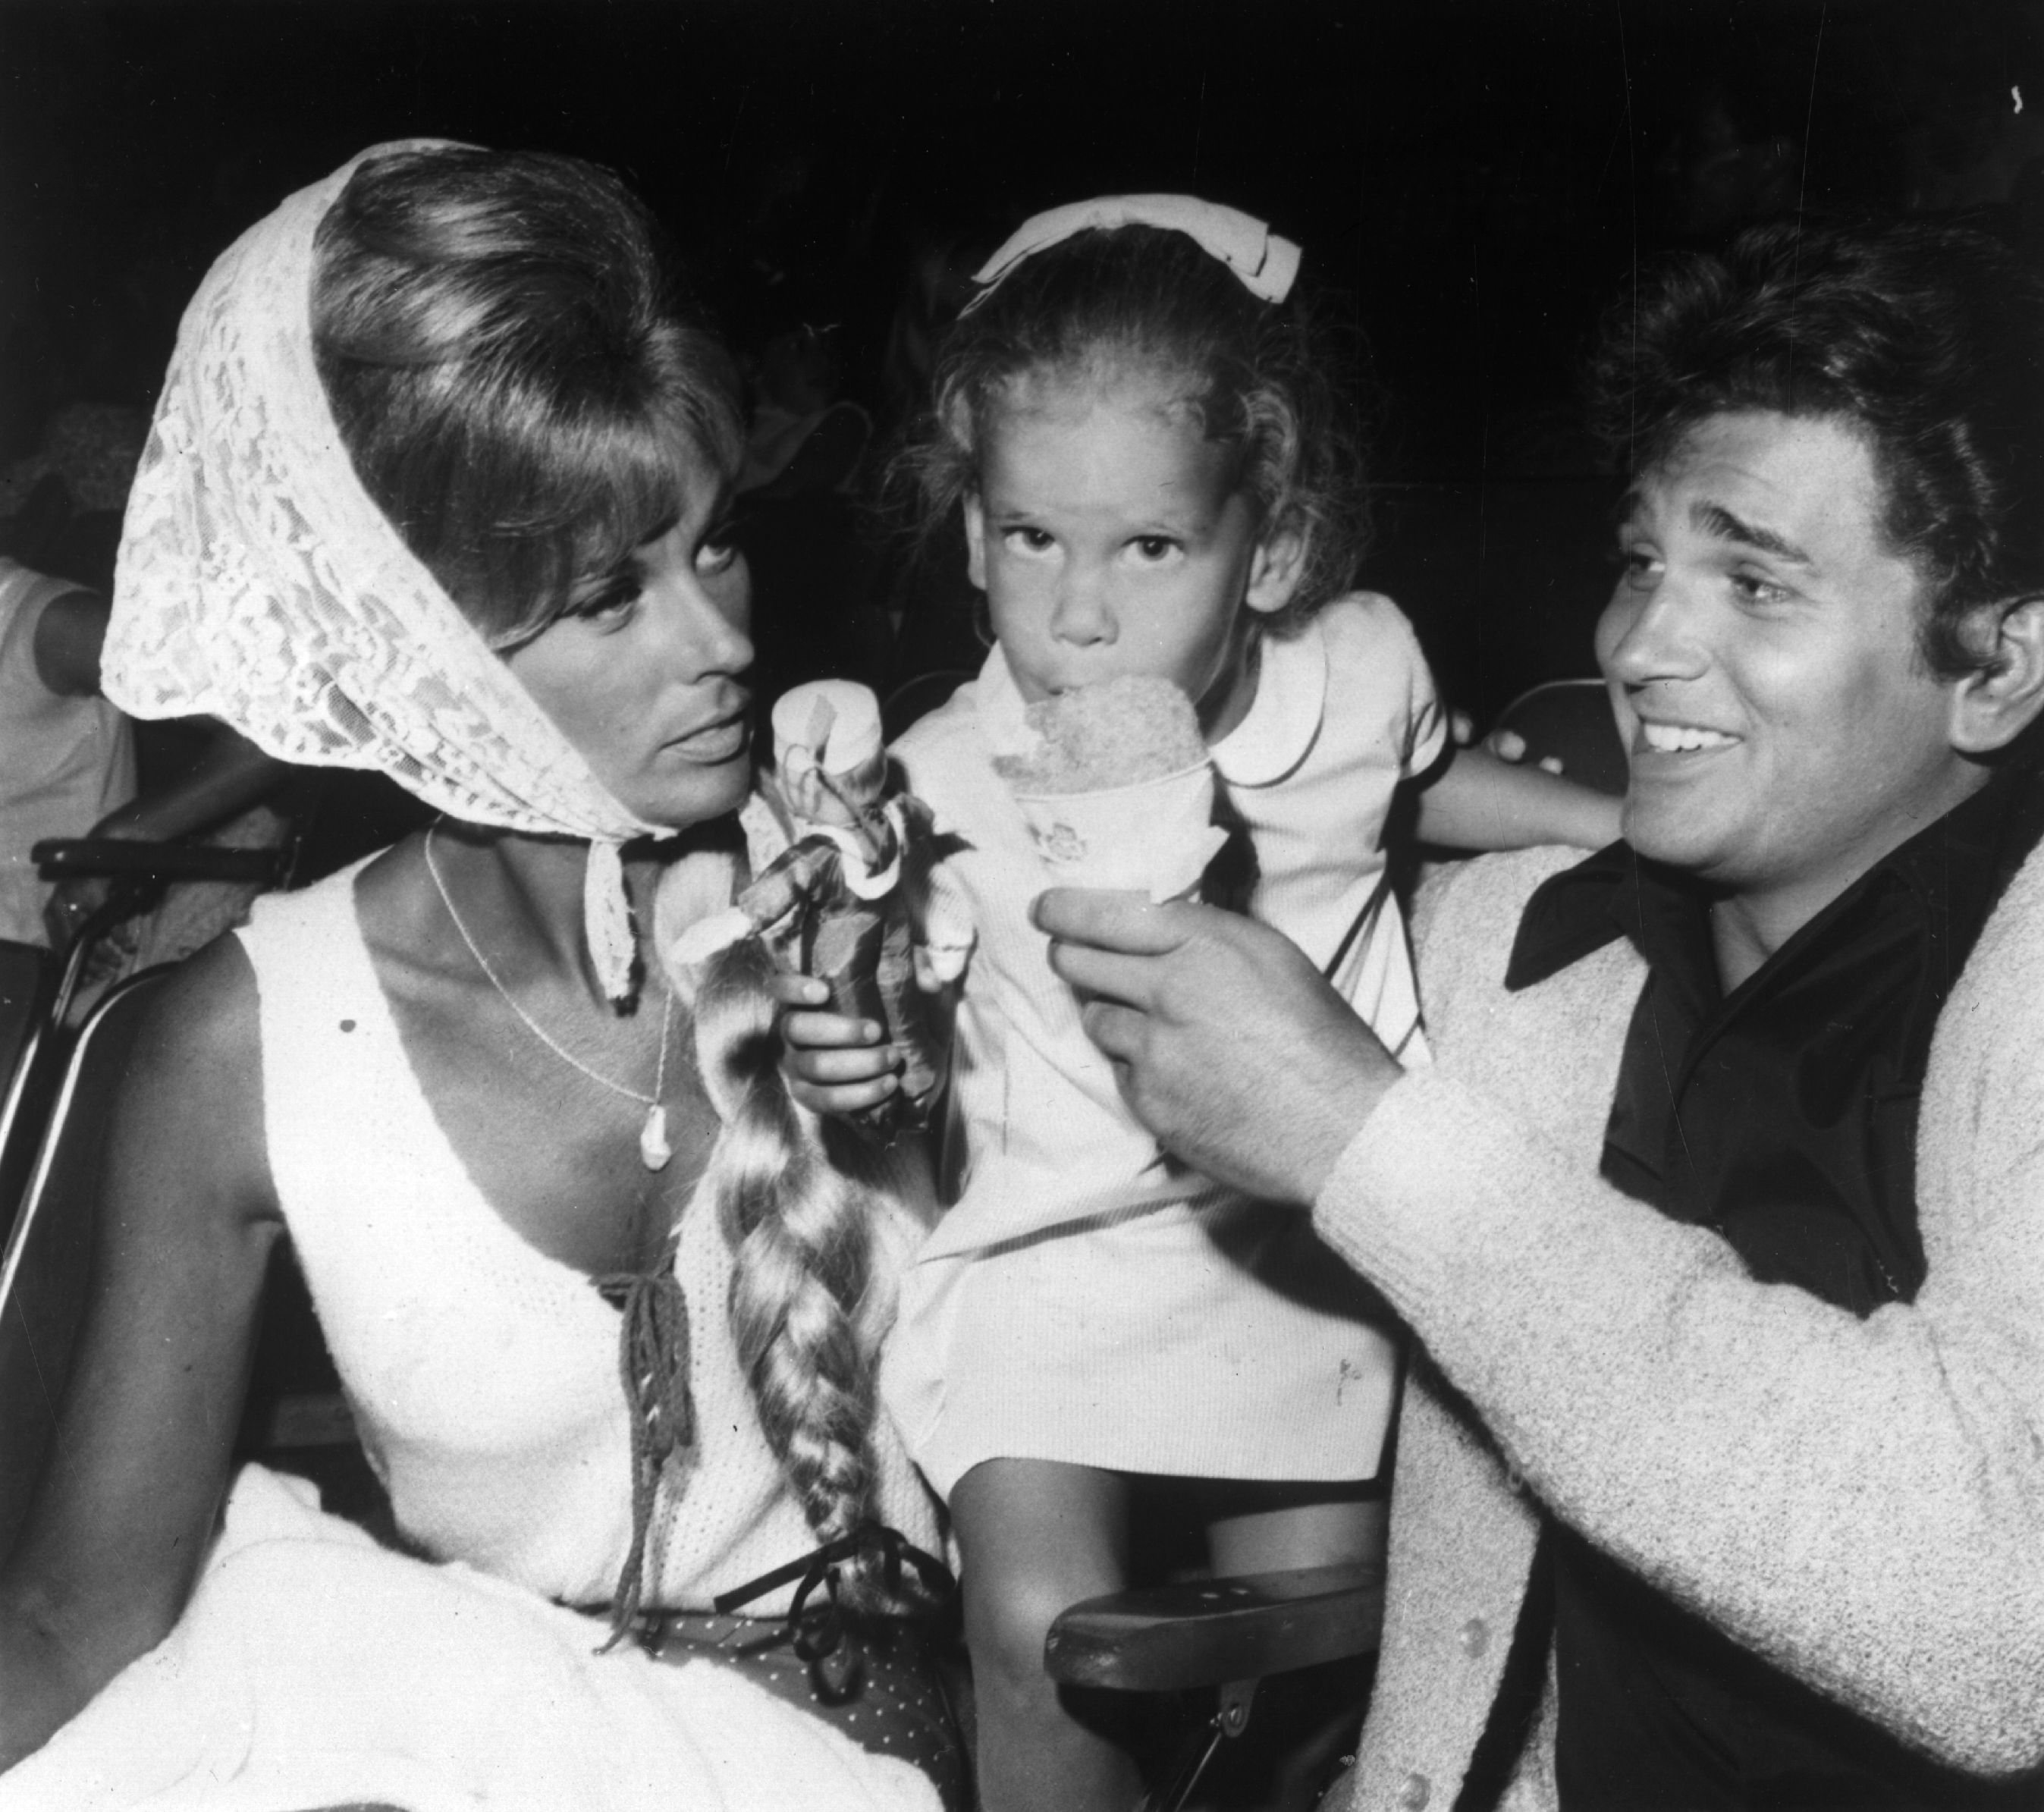 Michael Landon and Lynn Now with their daughter in the United State in 1965. | Source: Getty Images